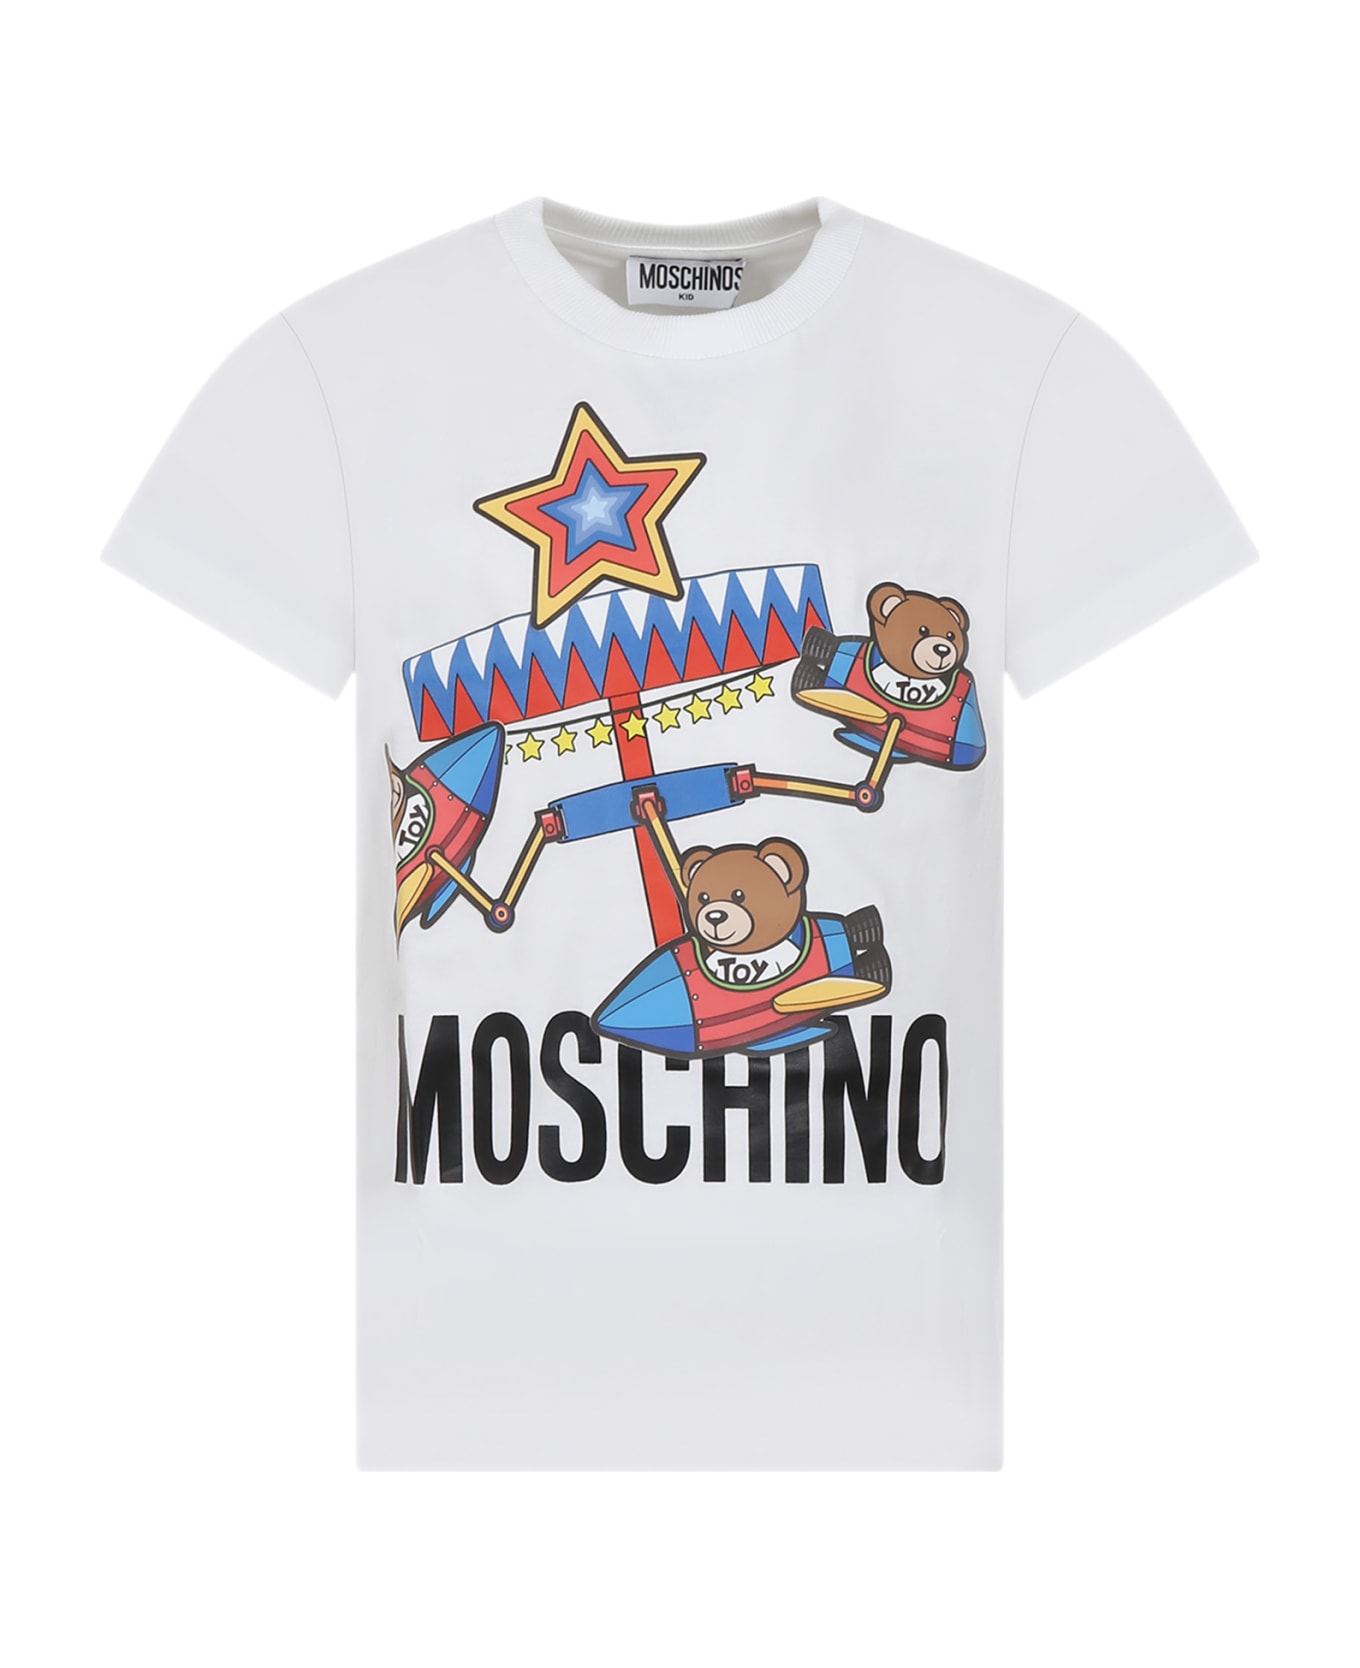 Moschino White T-shirt For Kids With Teddy Bears Print - White